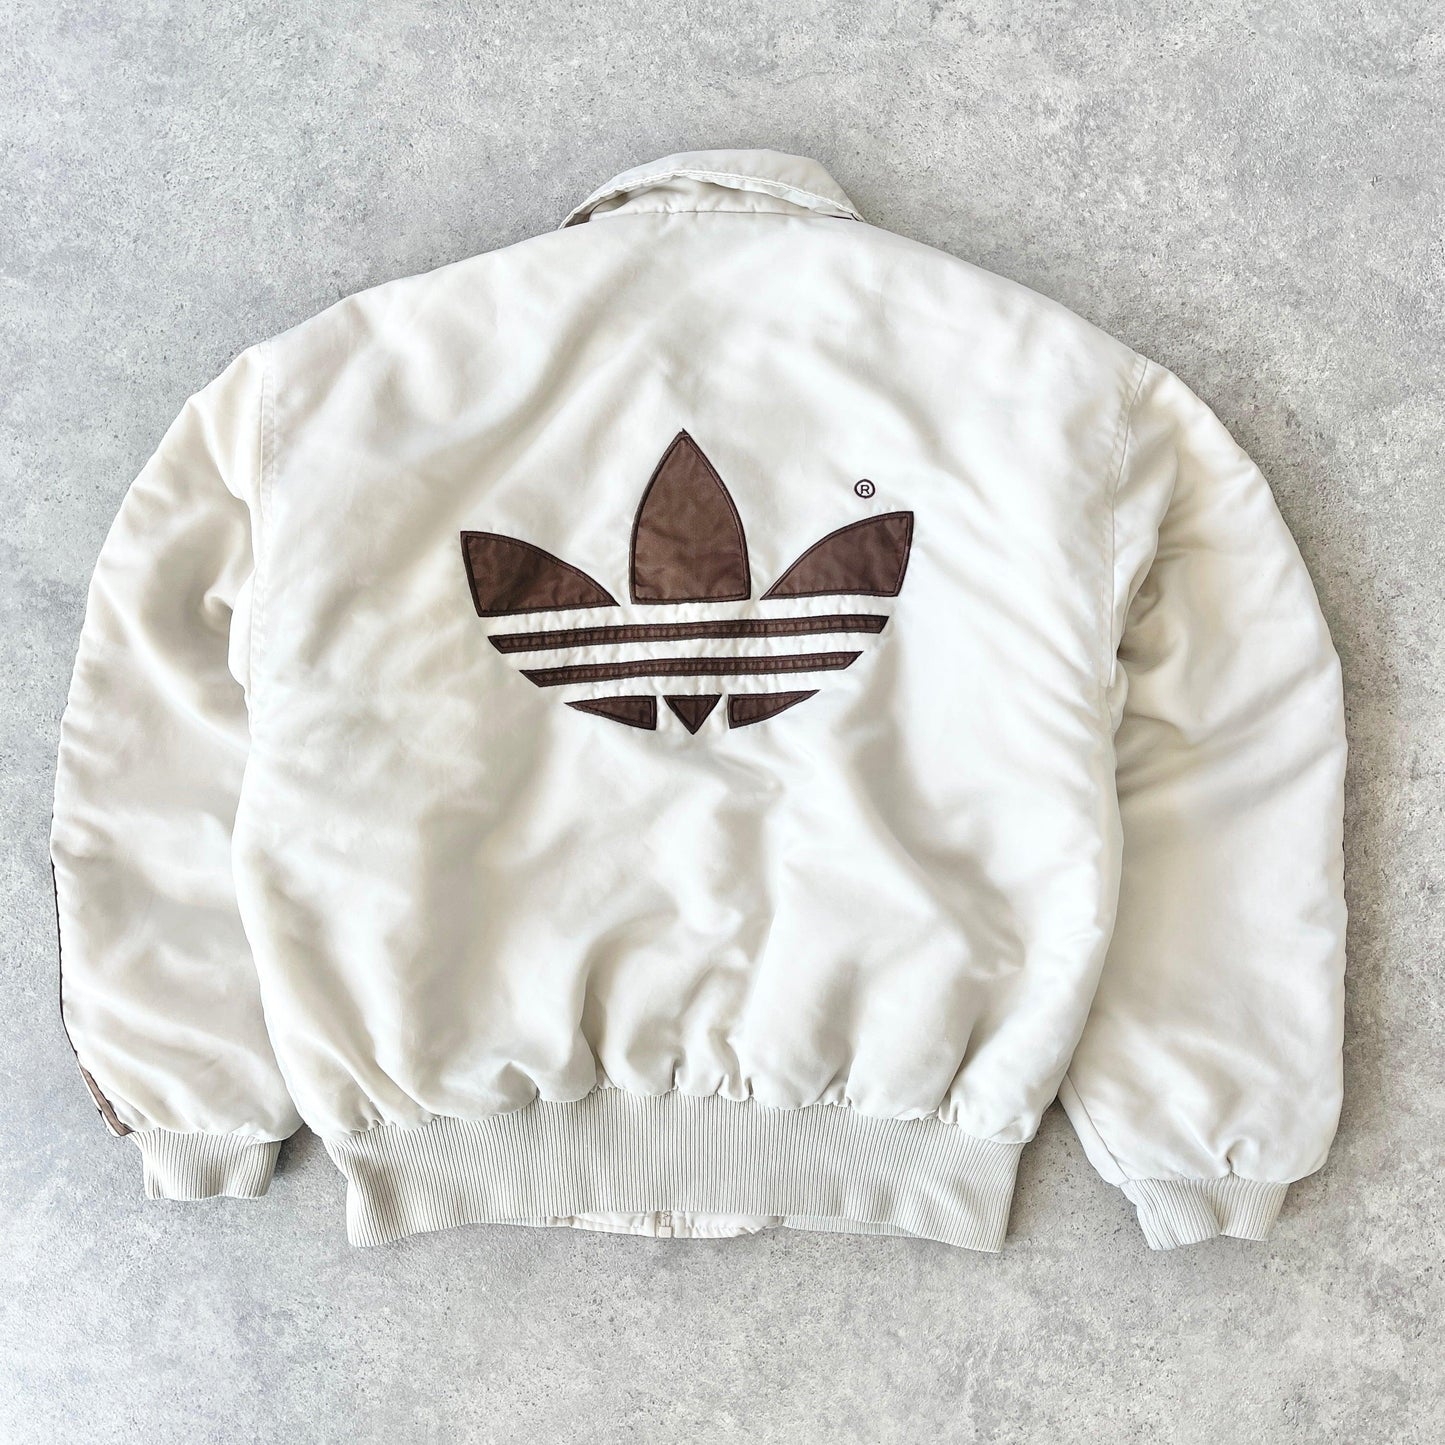 Adidas RARE 1990s padded bomber jacket (M) - Known Source